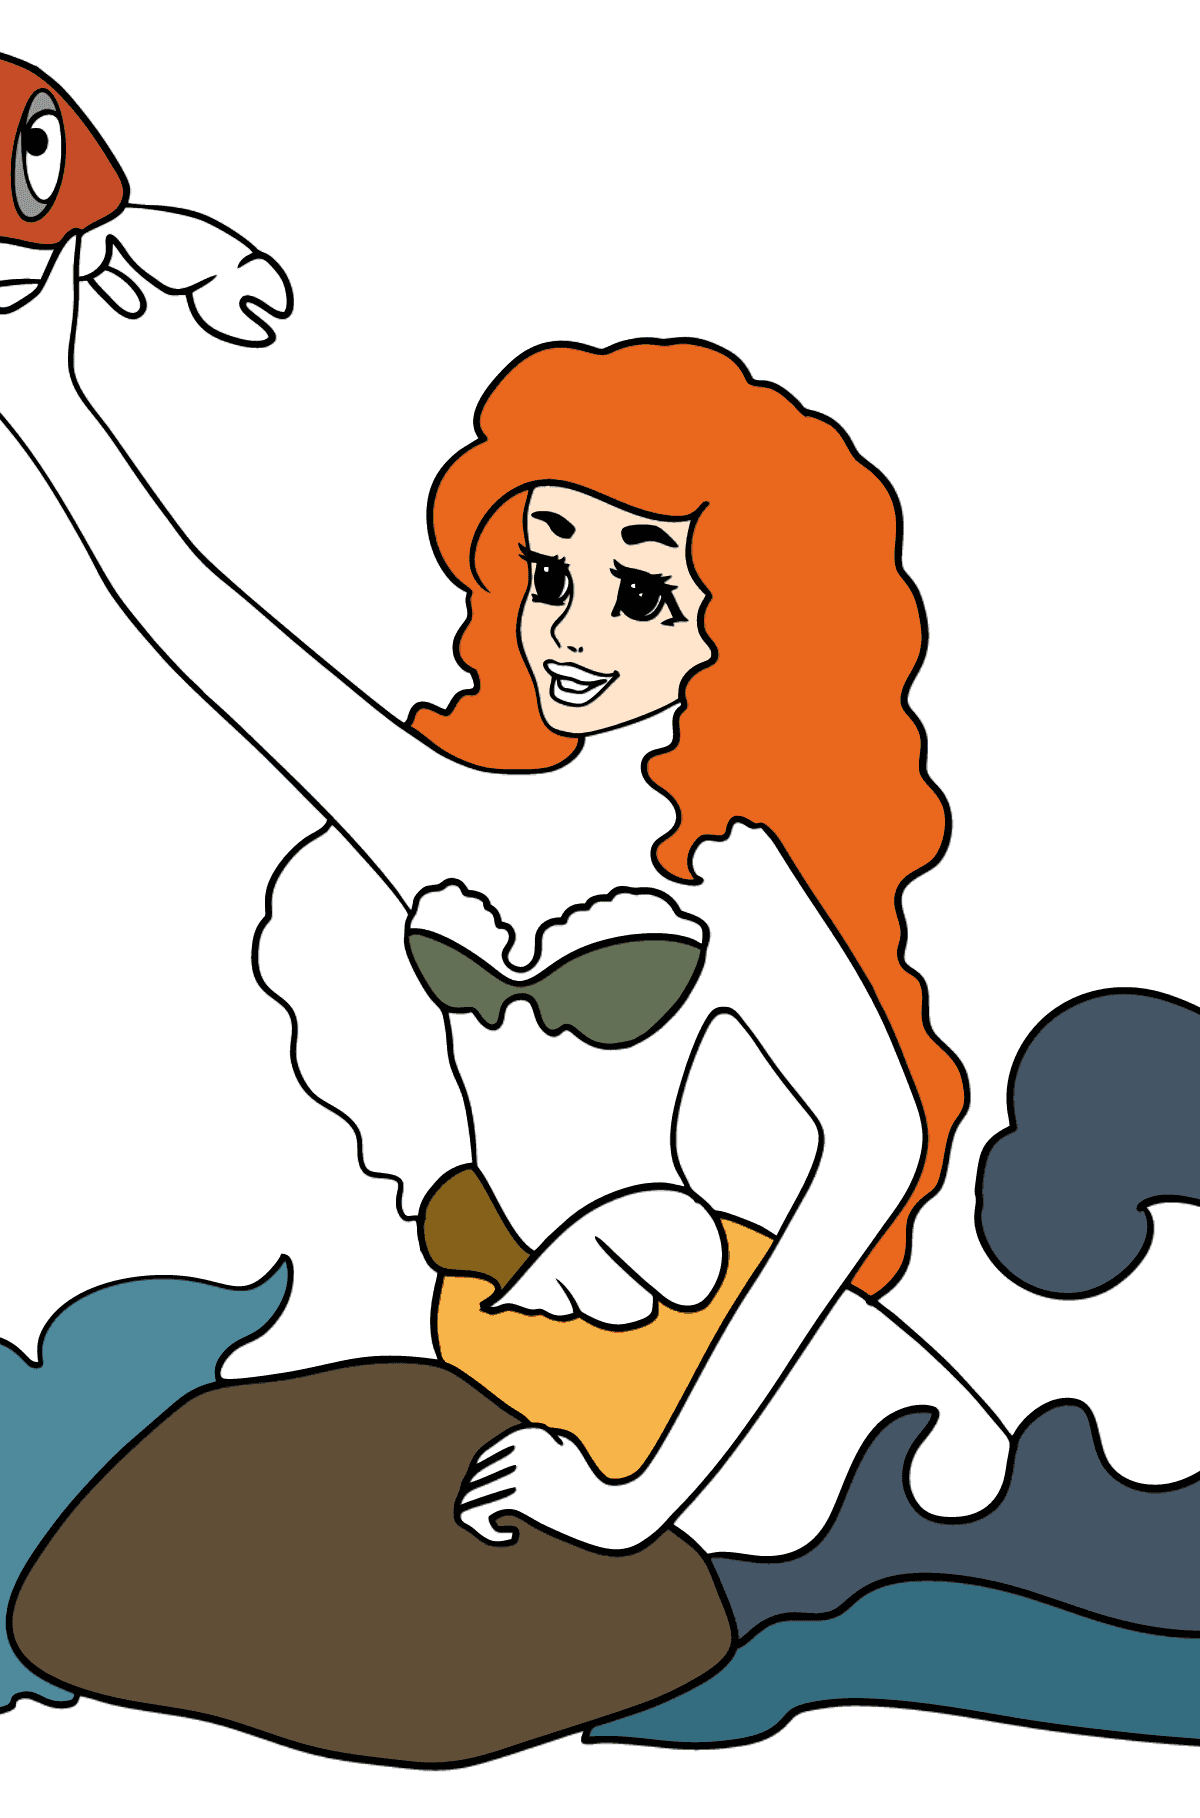 Coloring Page Mermaid and Crab - Coloring Pages for Kids